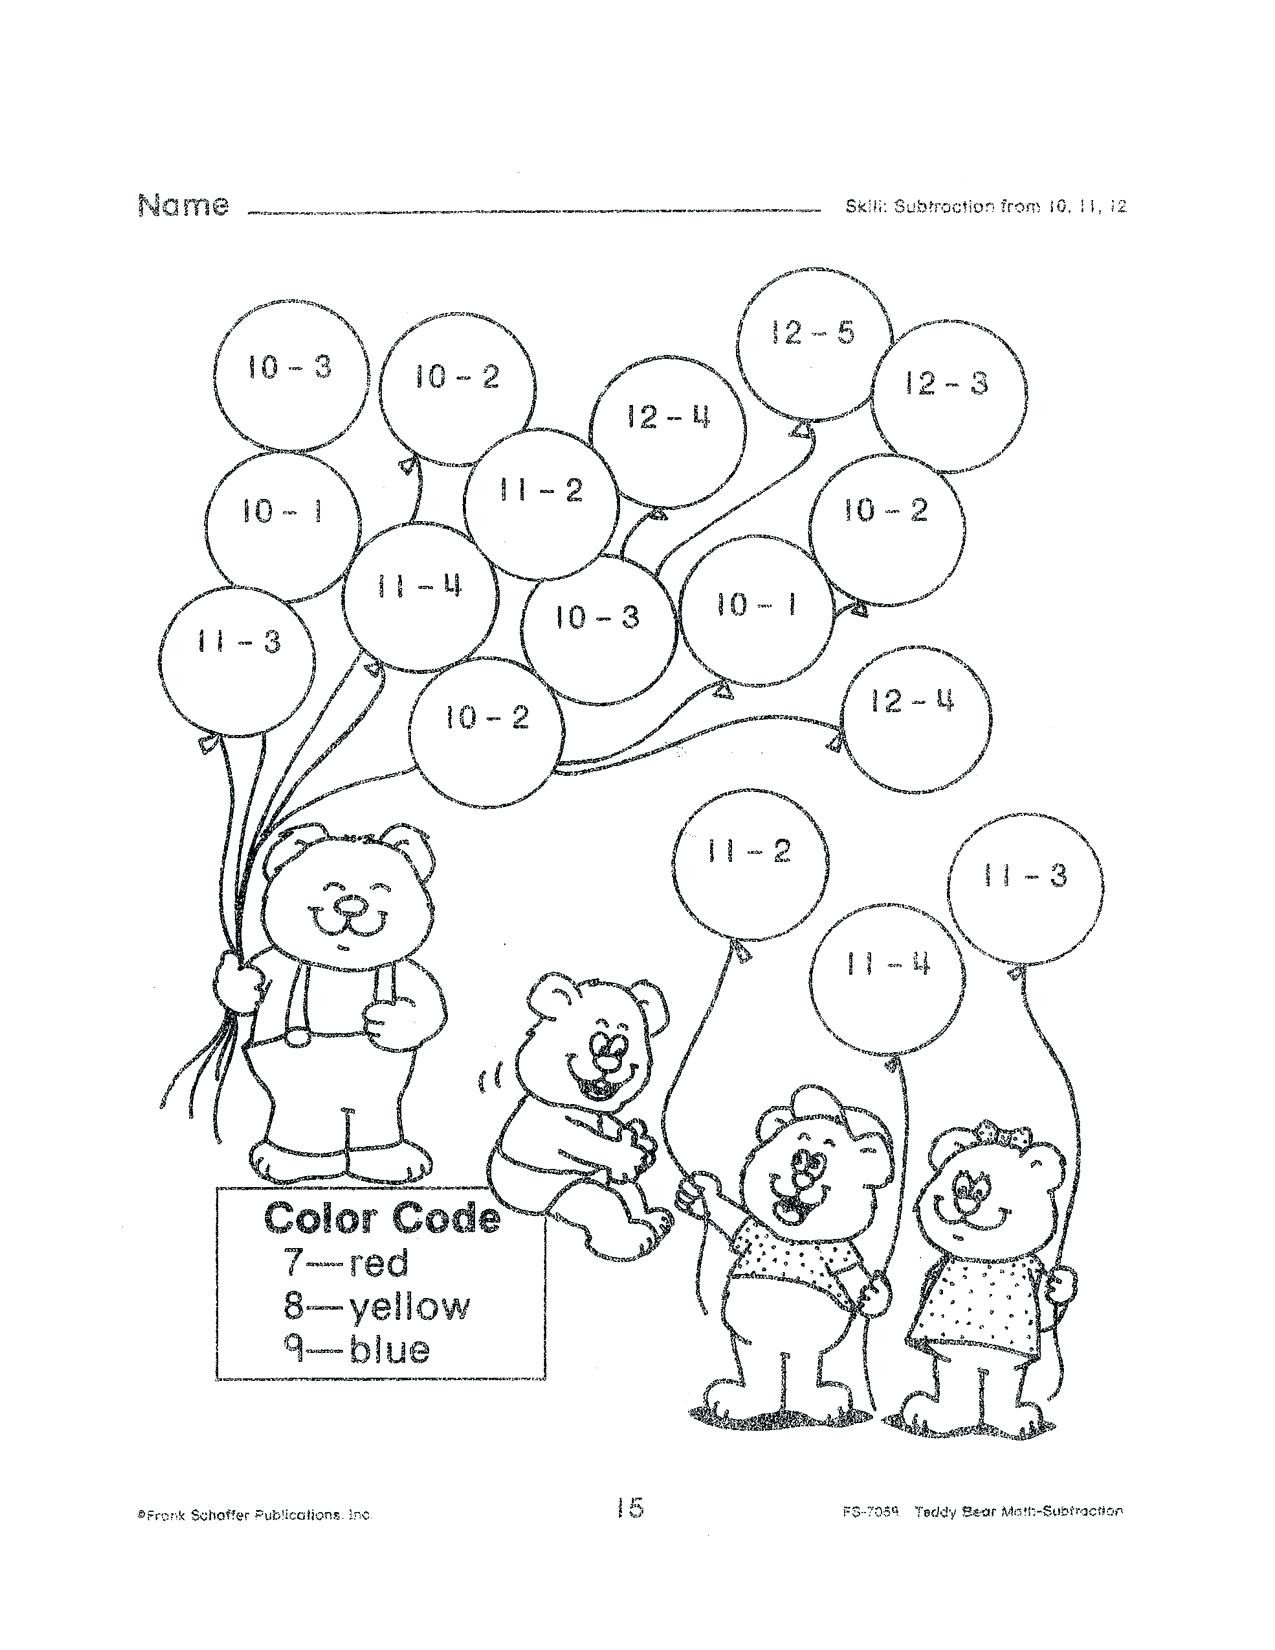 20 5th Grade Science Practice Worksheets Worksheet From Home